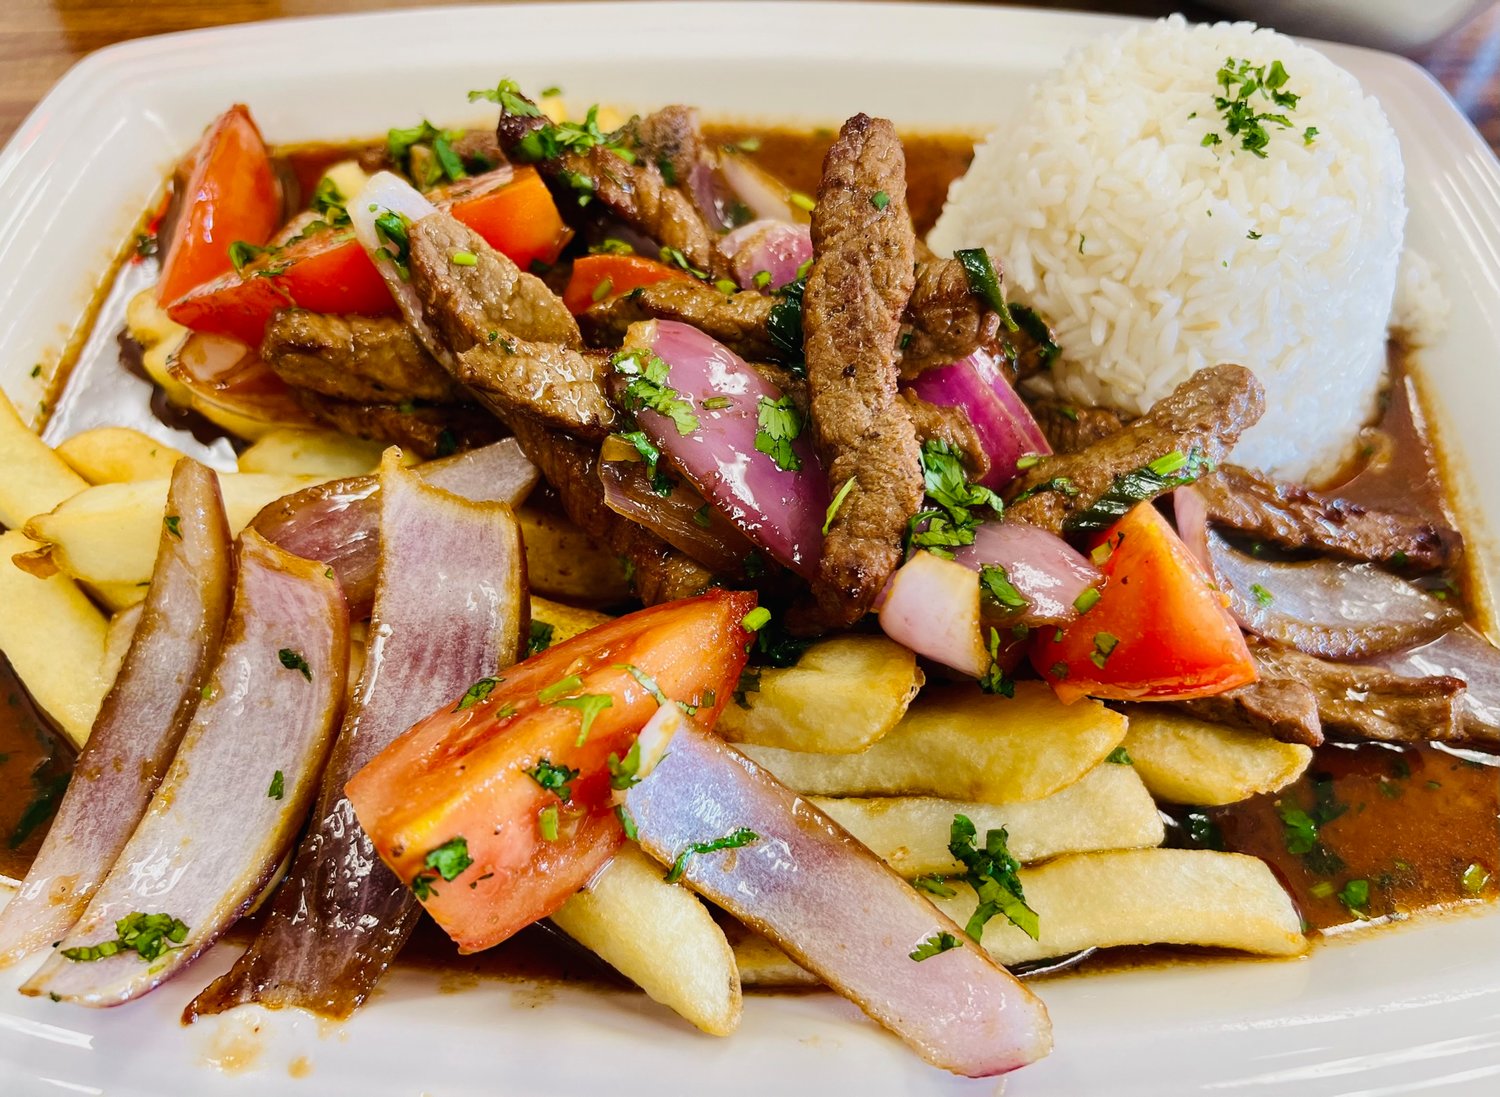 Lomo Saltado is one of several authentic Peruvian dishes made to order at Gabriella’s.